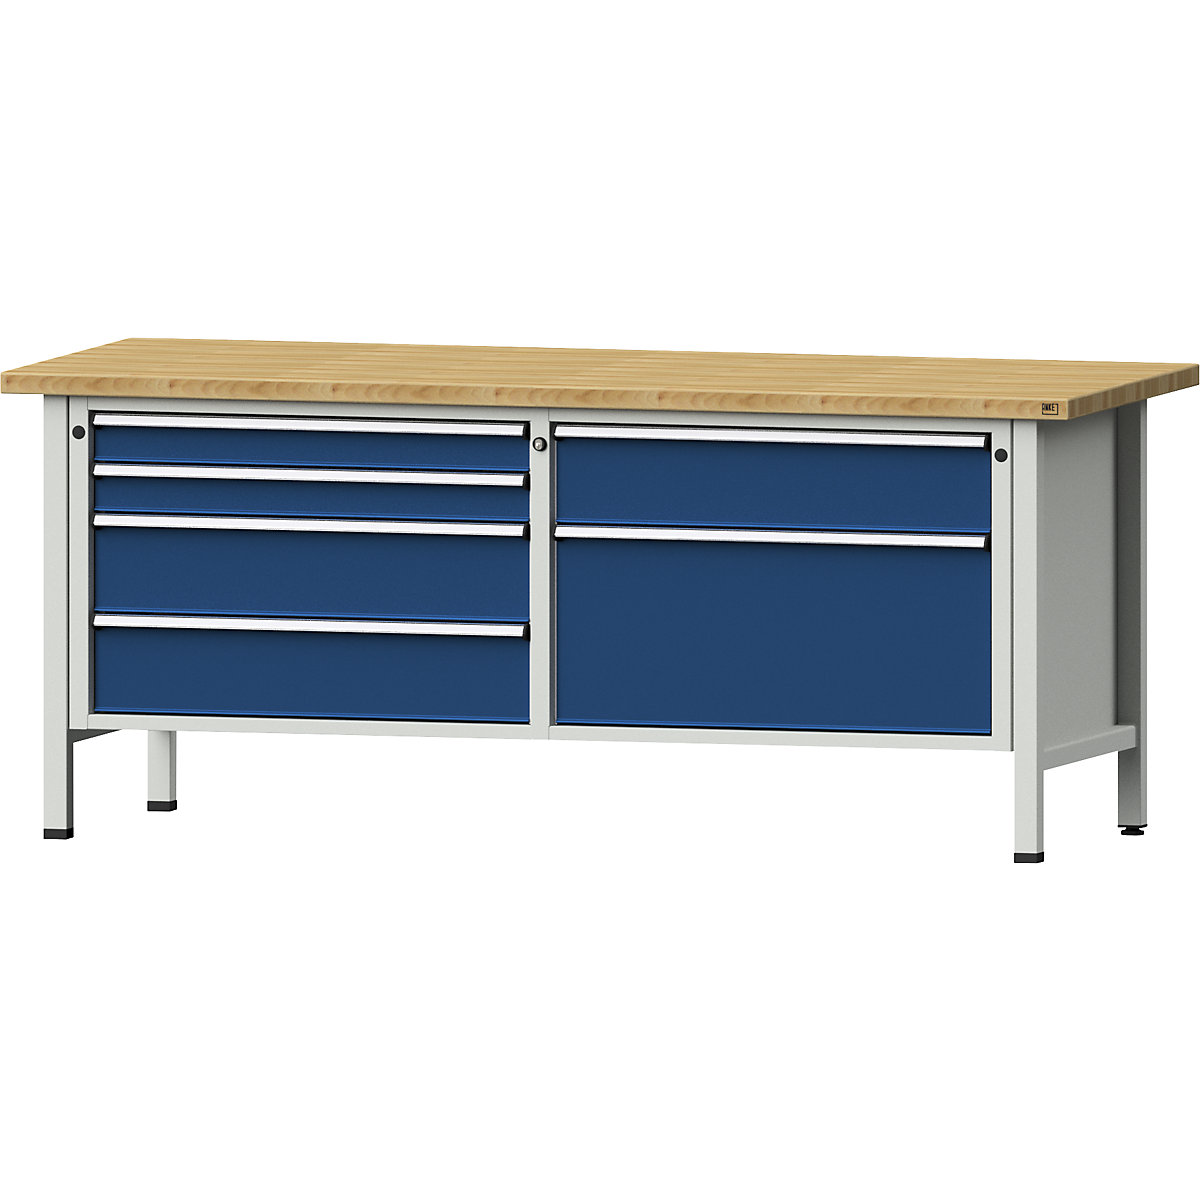 Workbenches 2000 mm wide, frame construction - ANKE